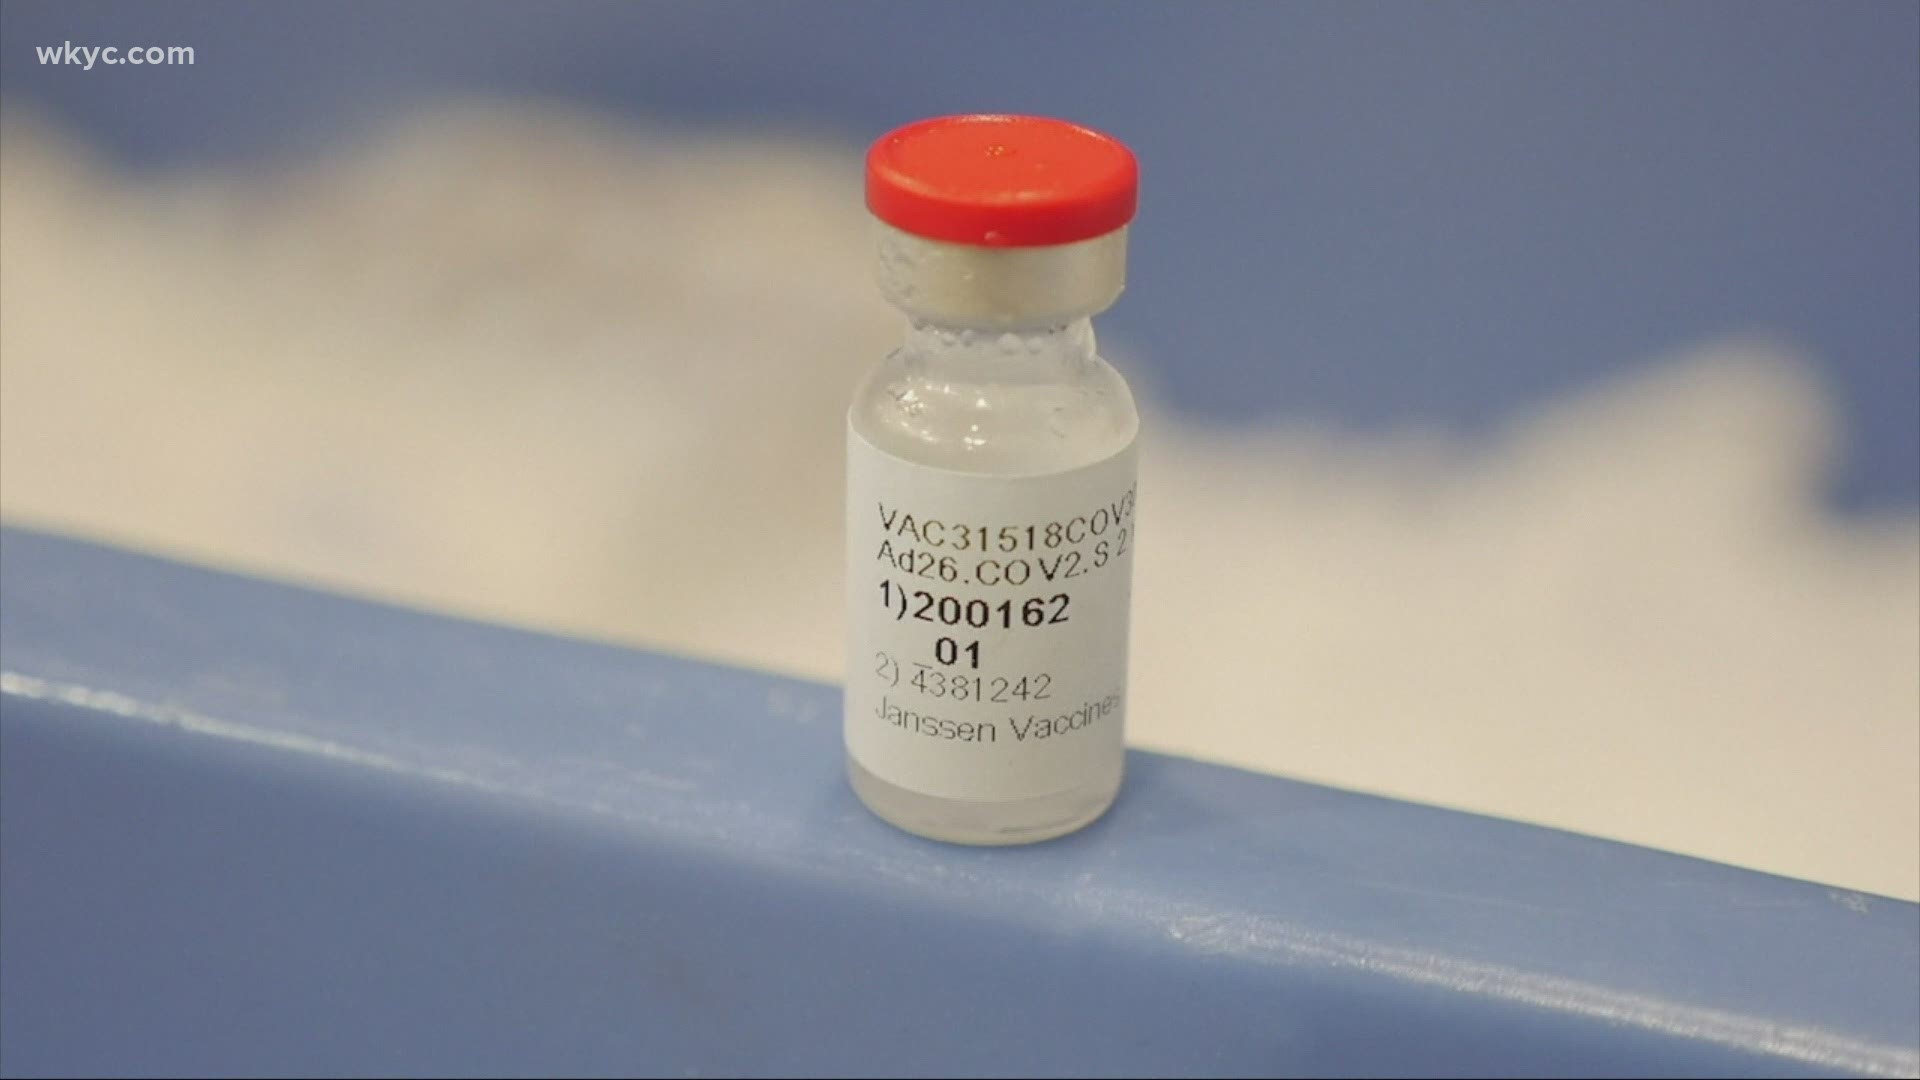 The FDA is expected to quickly follow the recommendation and make J &J shot the third vaccine authorized for emergency use in the U.S. Monica Robins has the details.